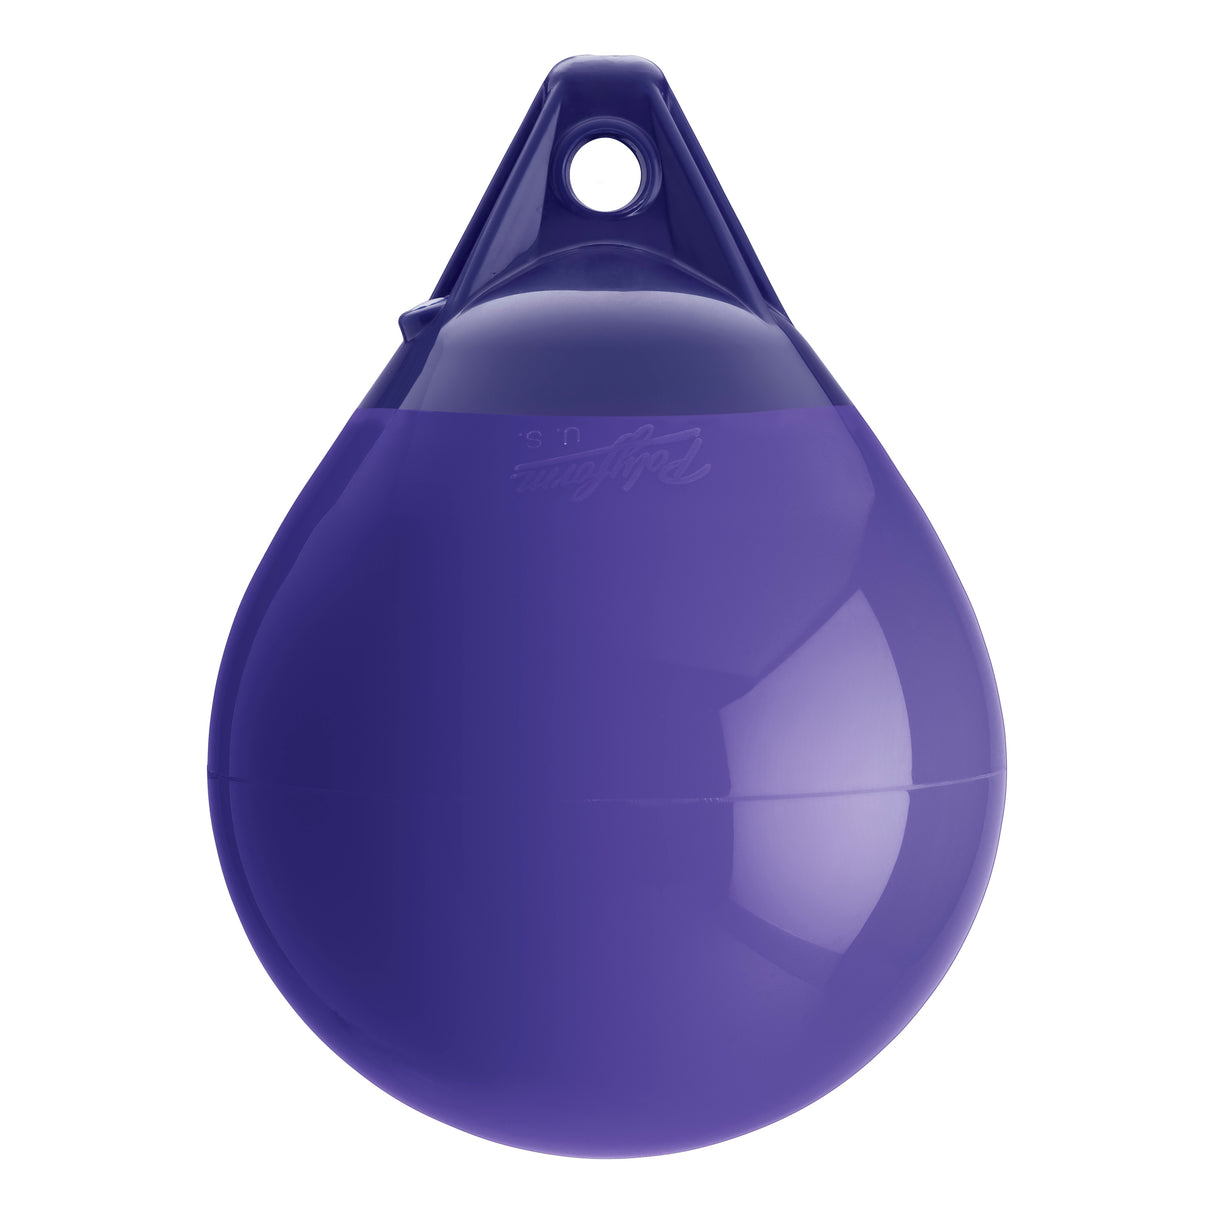 Purple inflatable buoy, Polyform A-1 